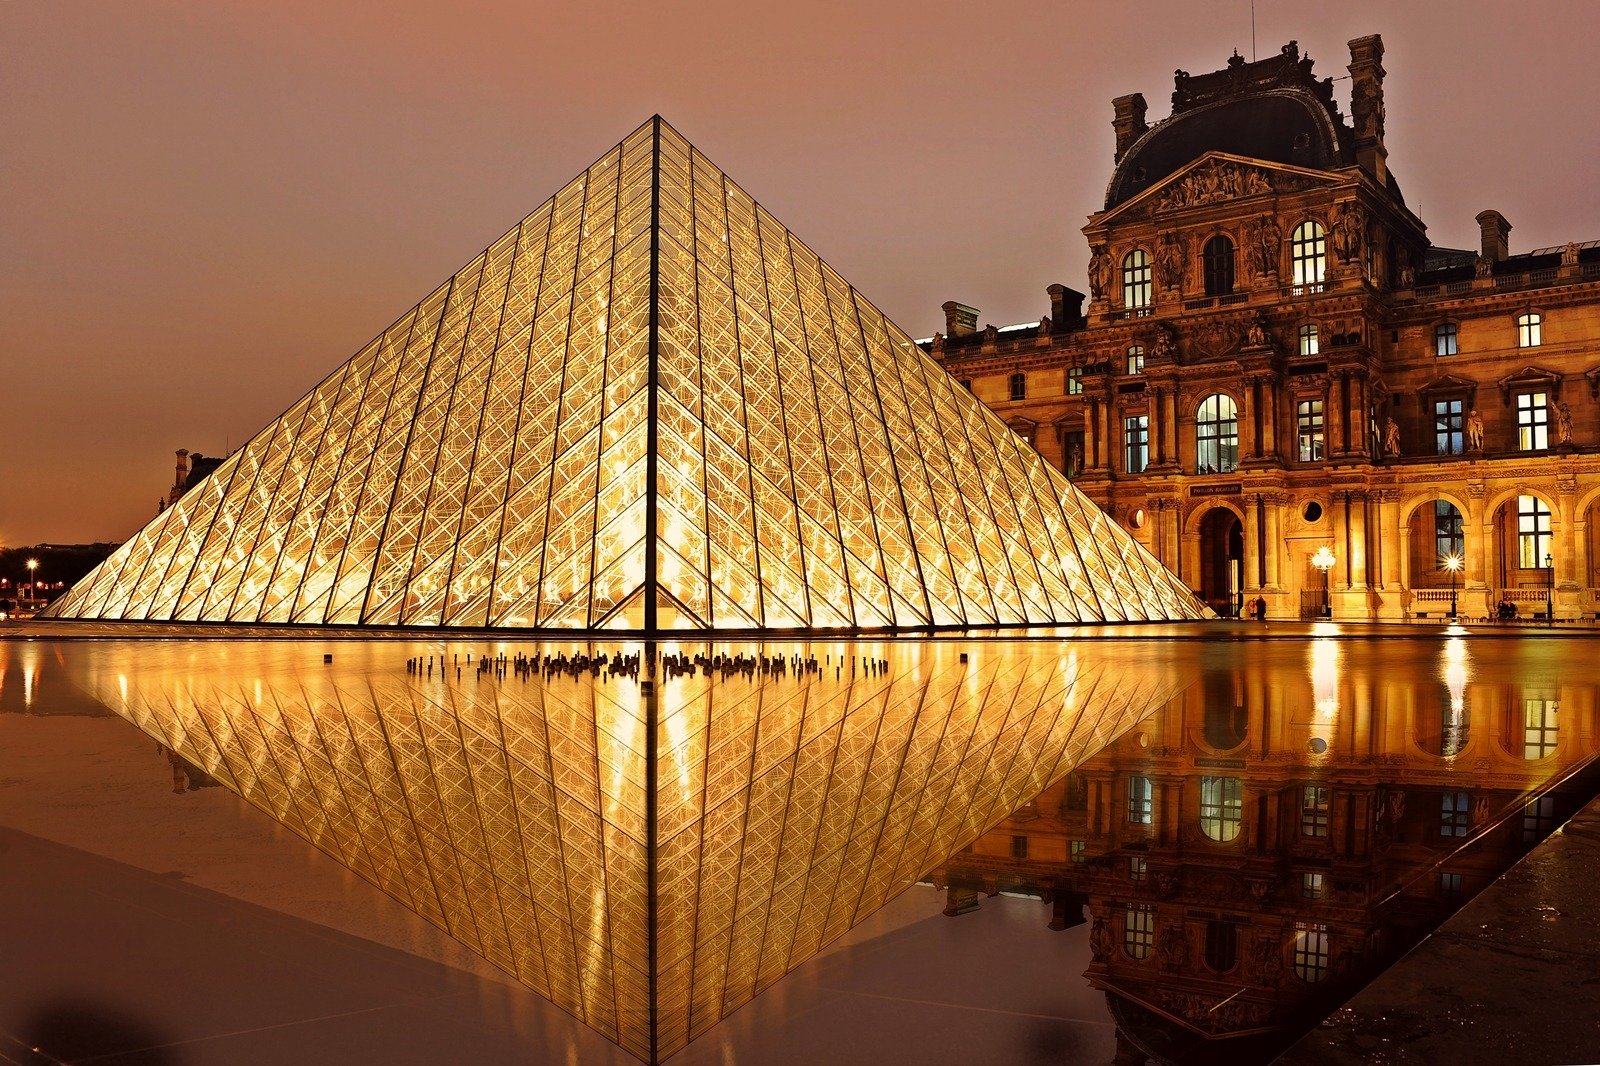 Image of The Louvre in Paris